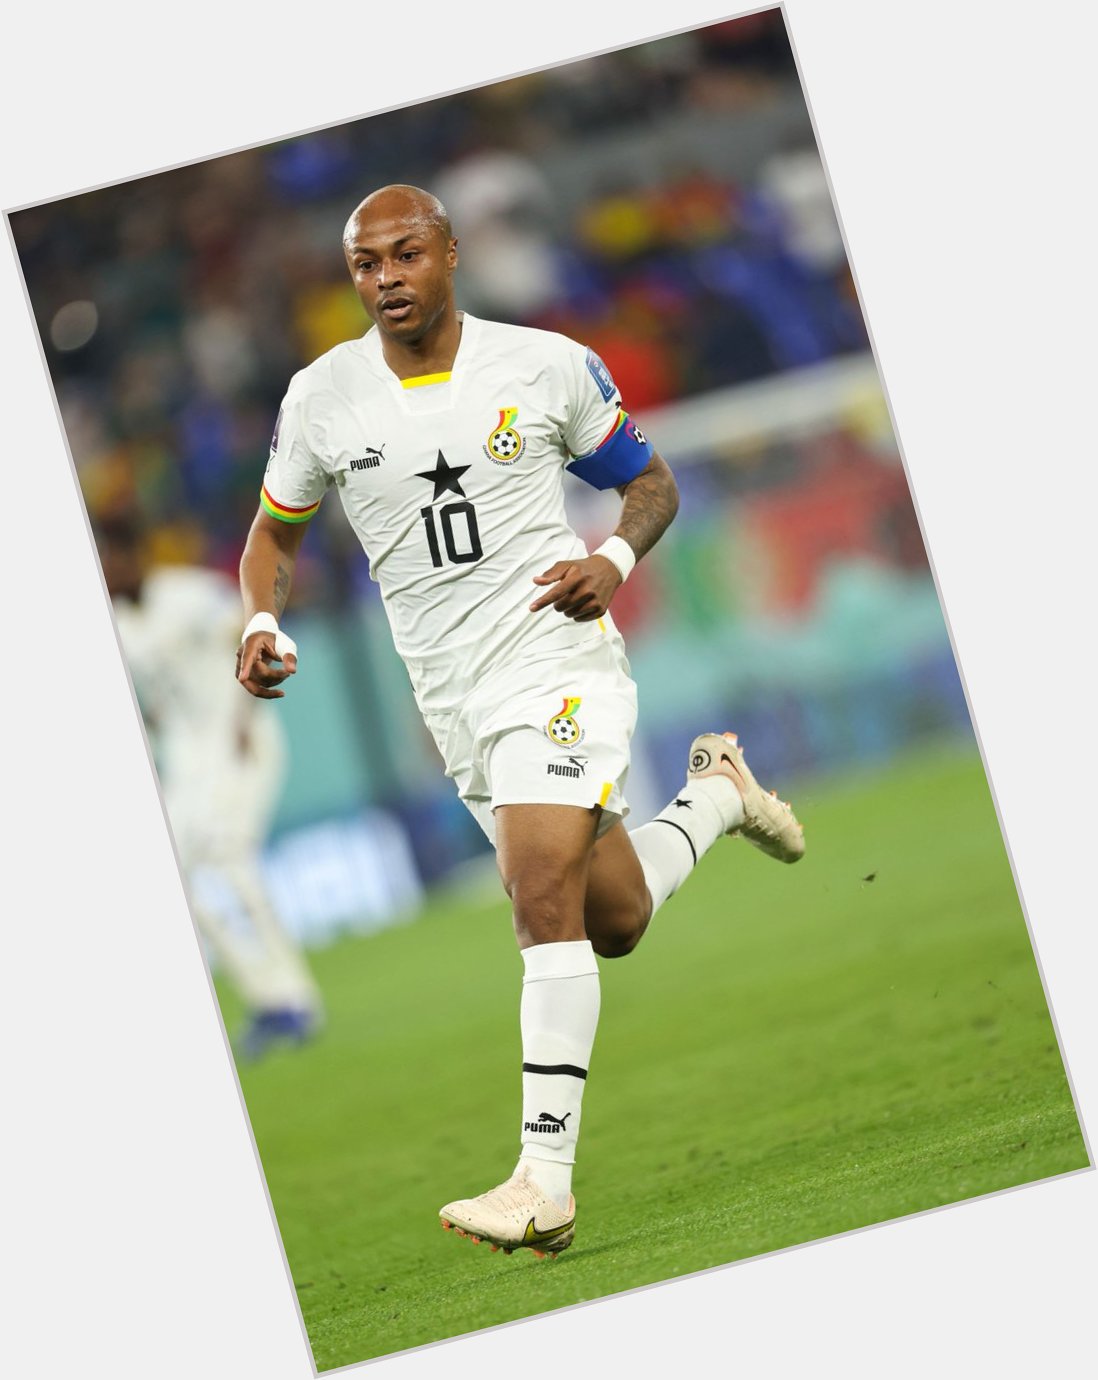 It\s a celebration Happy Birthday to the Black Stars Captain  André Ayew

Have a great day!! 